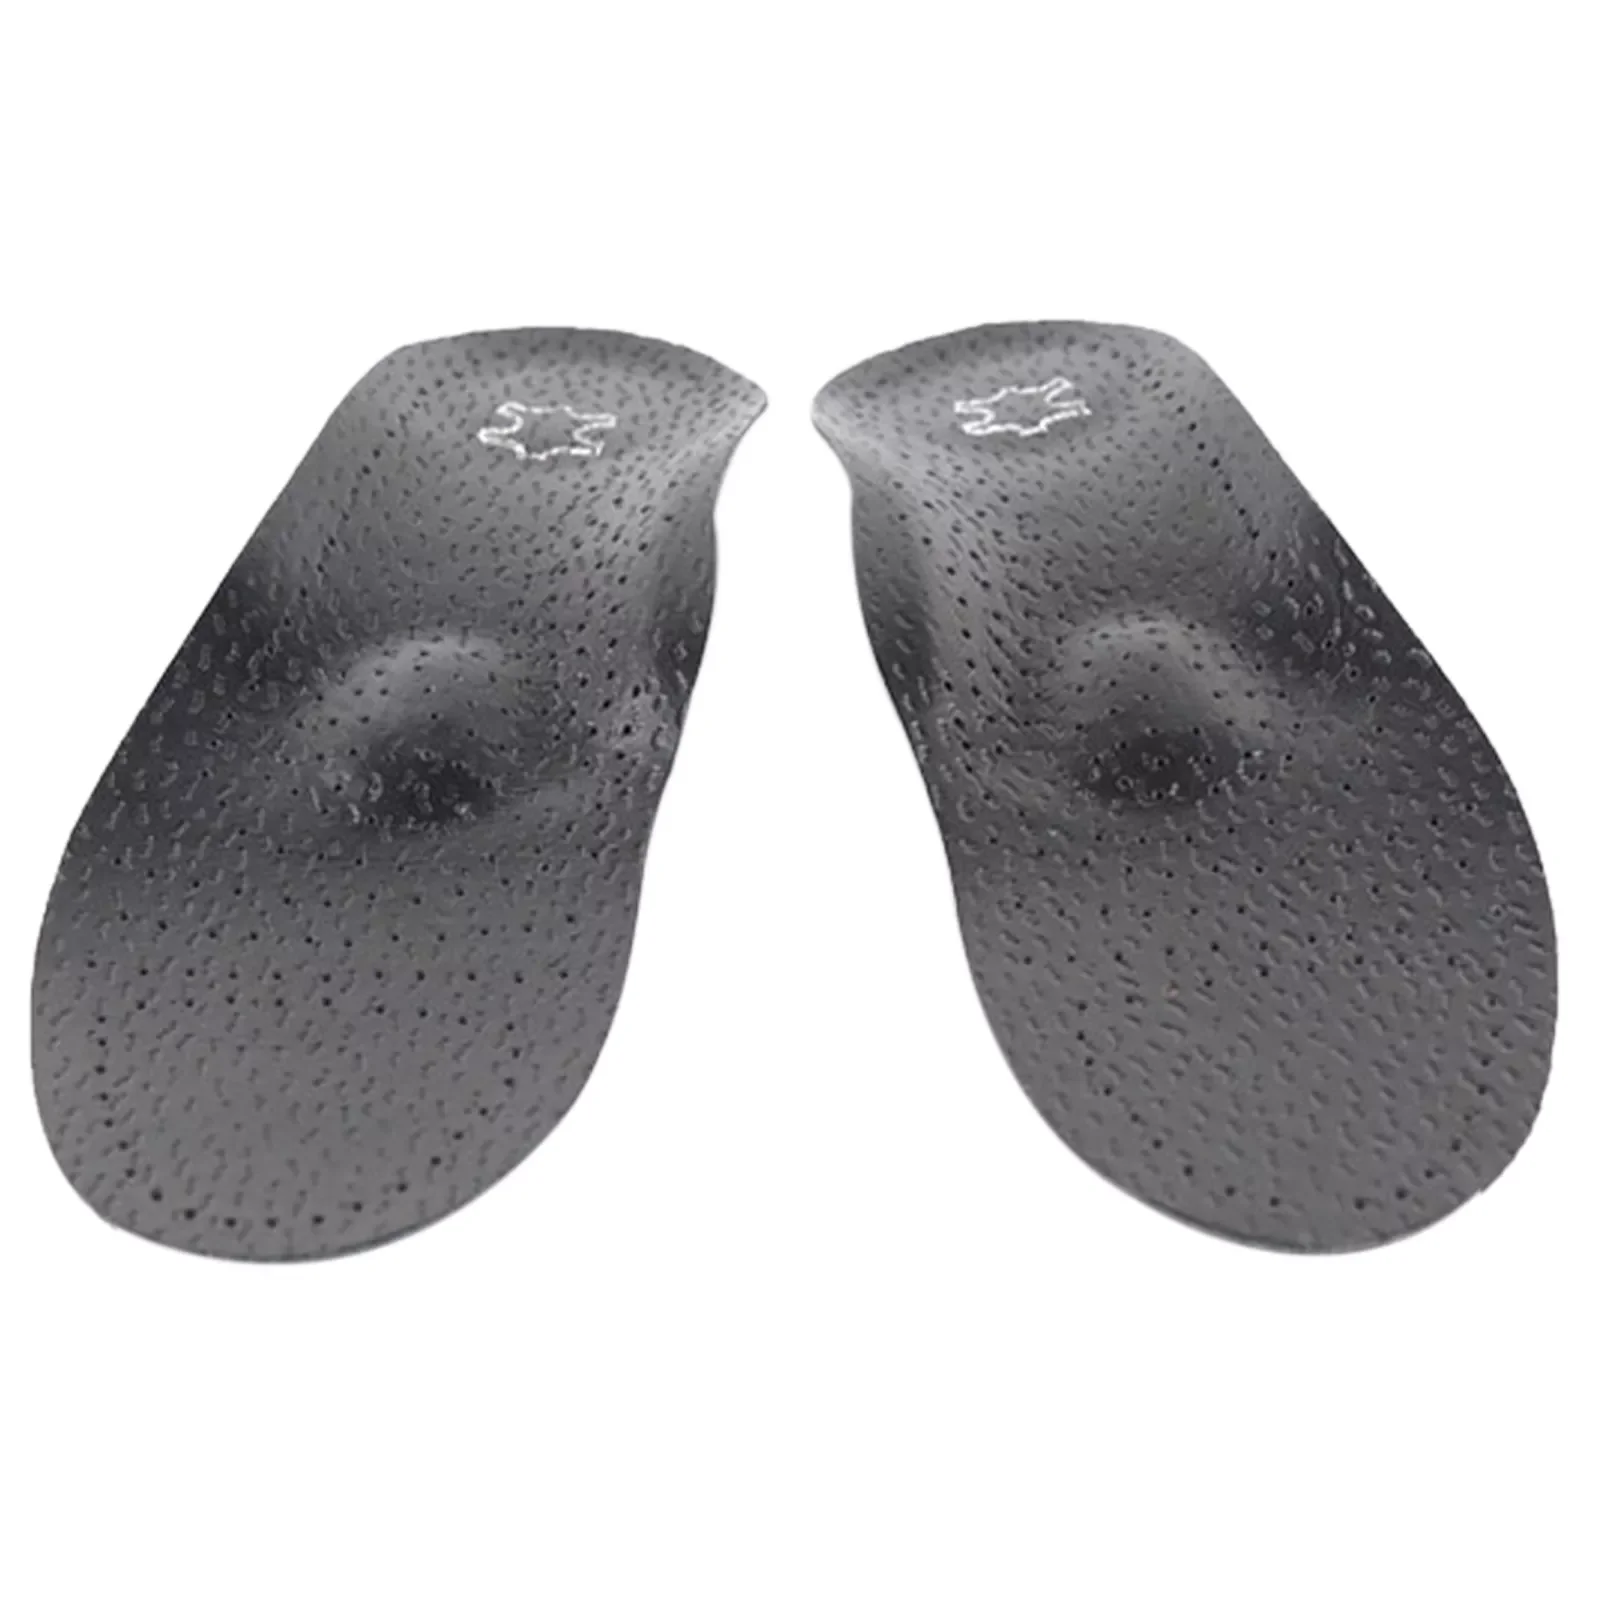 Men Women Heel Pain Shoes Accessories Orthotic Insoles Protection Replacement Regenerated Leather Full Pad Shock-Absorbant